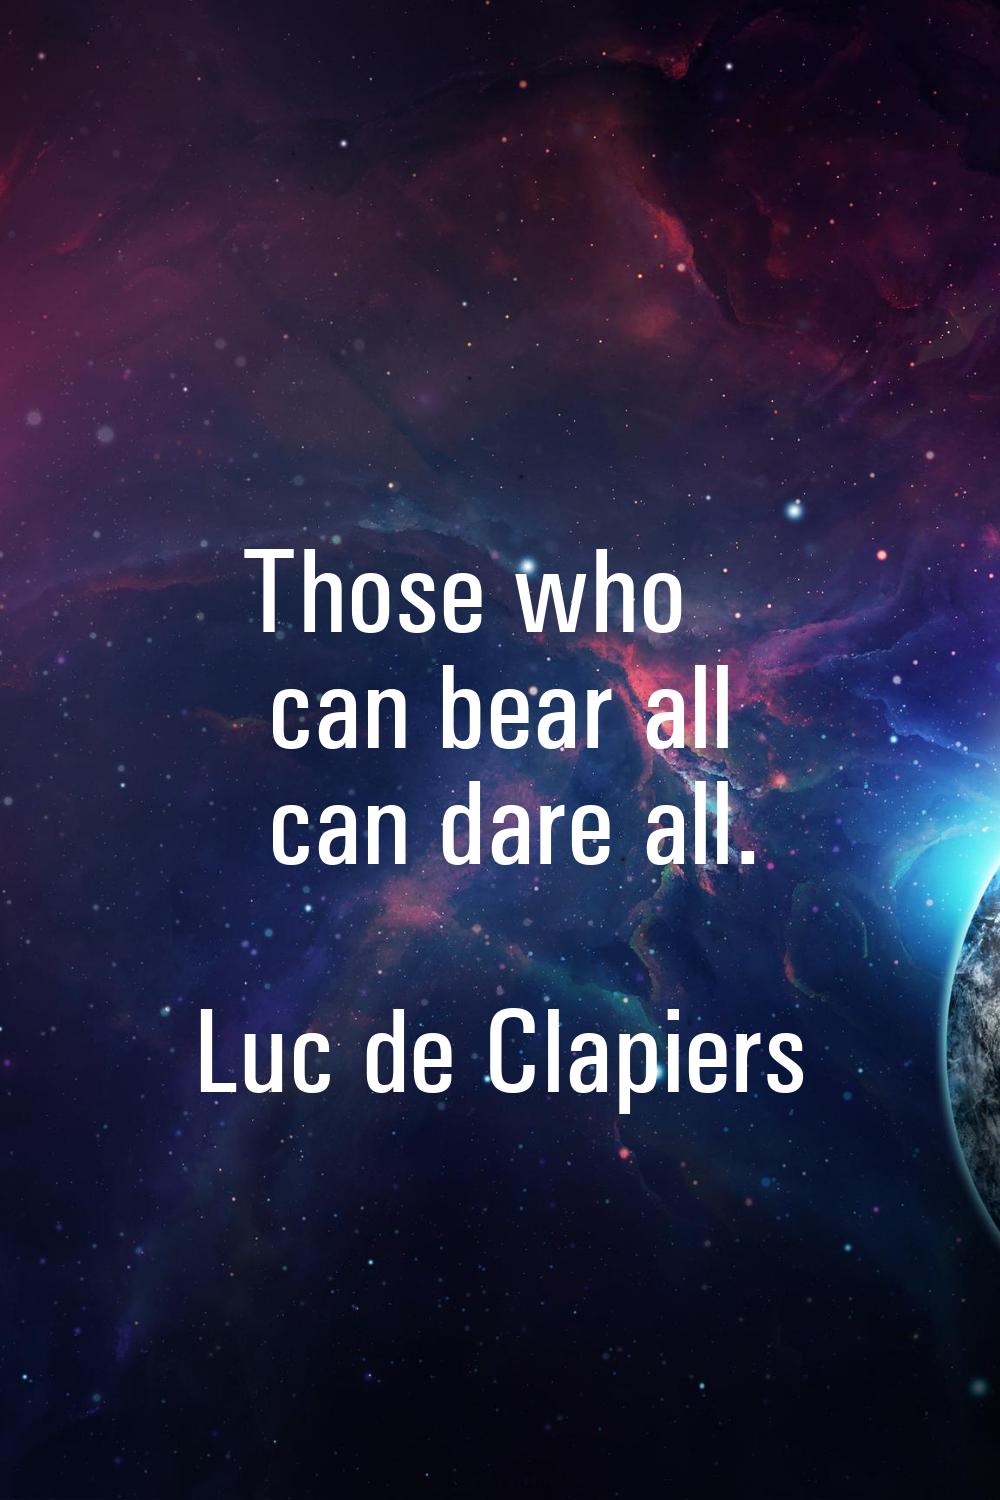 Those who can bear all can dare all.